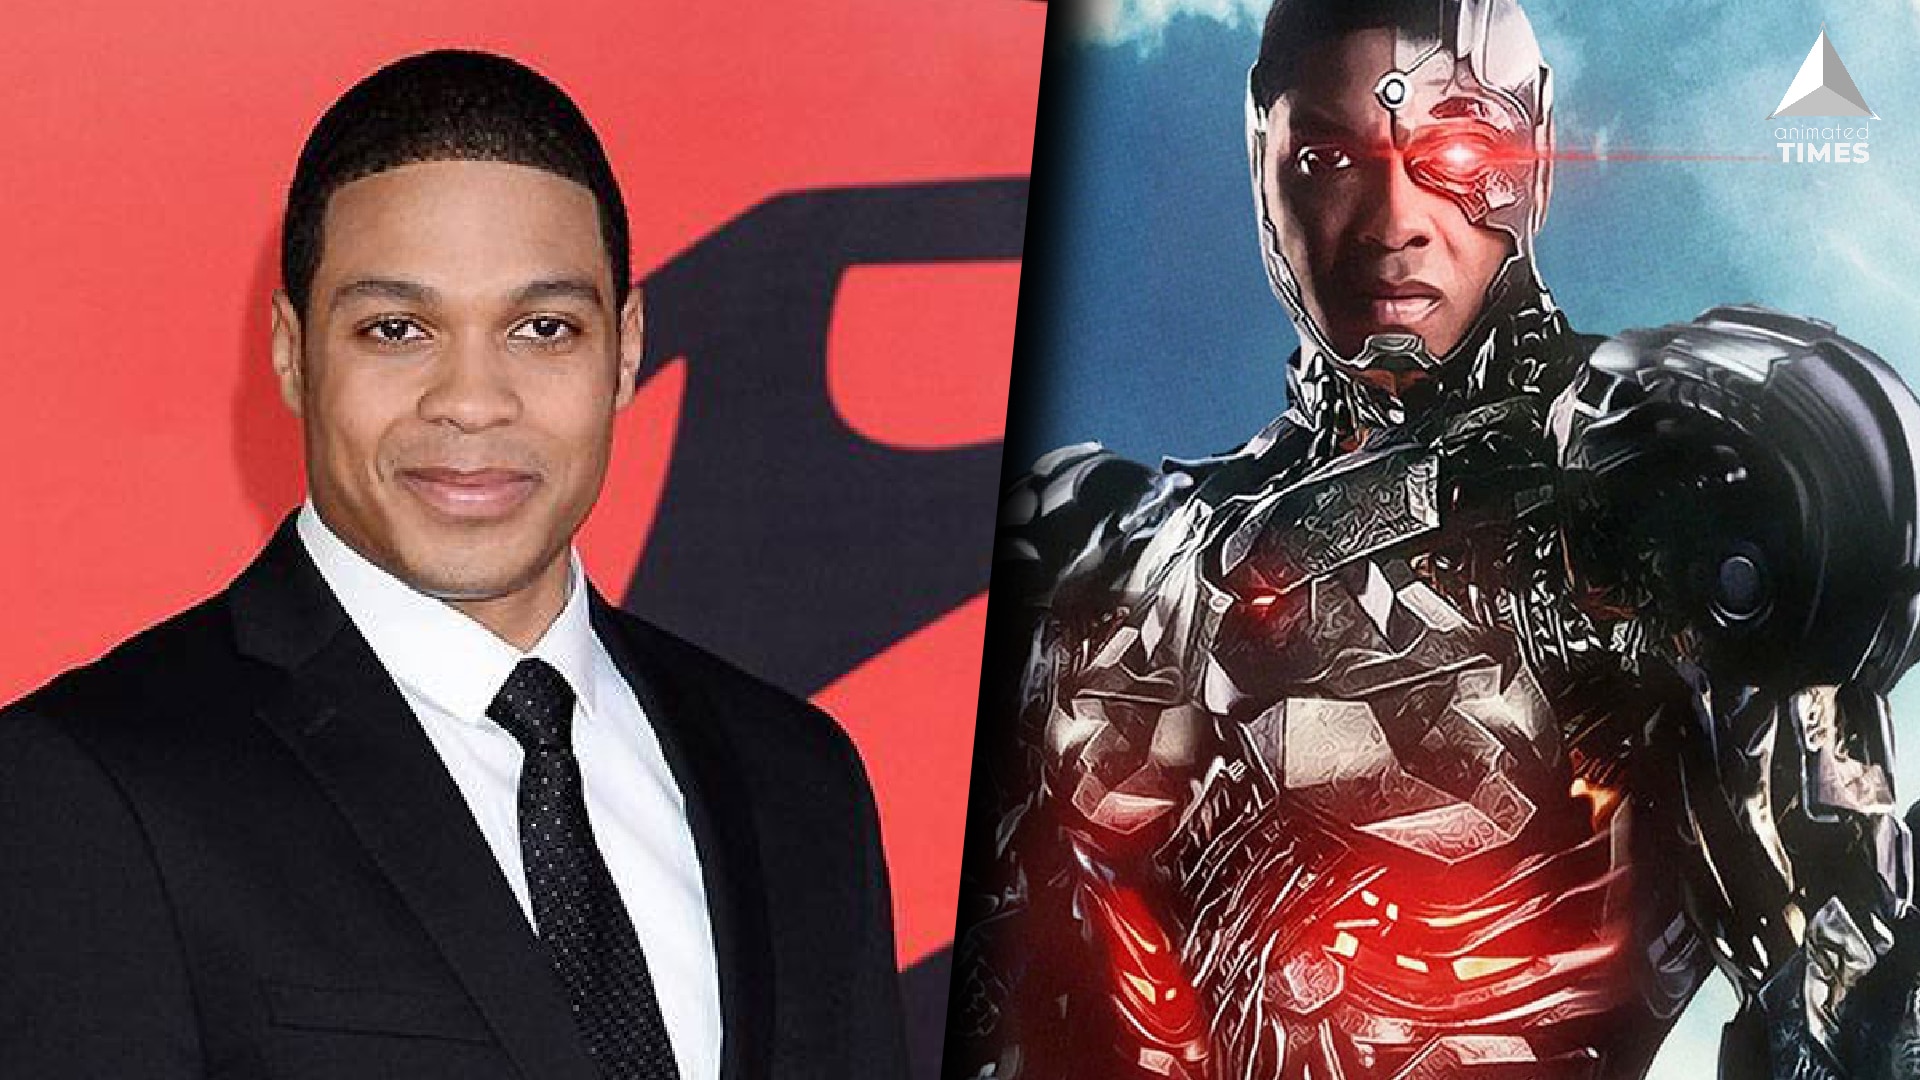 Warner Bros. States Ray Fisher Has Not Cooperated With Justice League Investigation